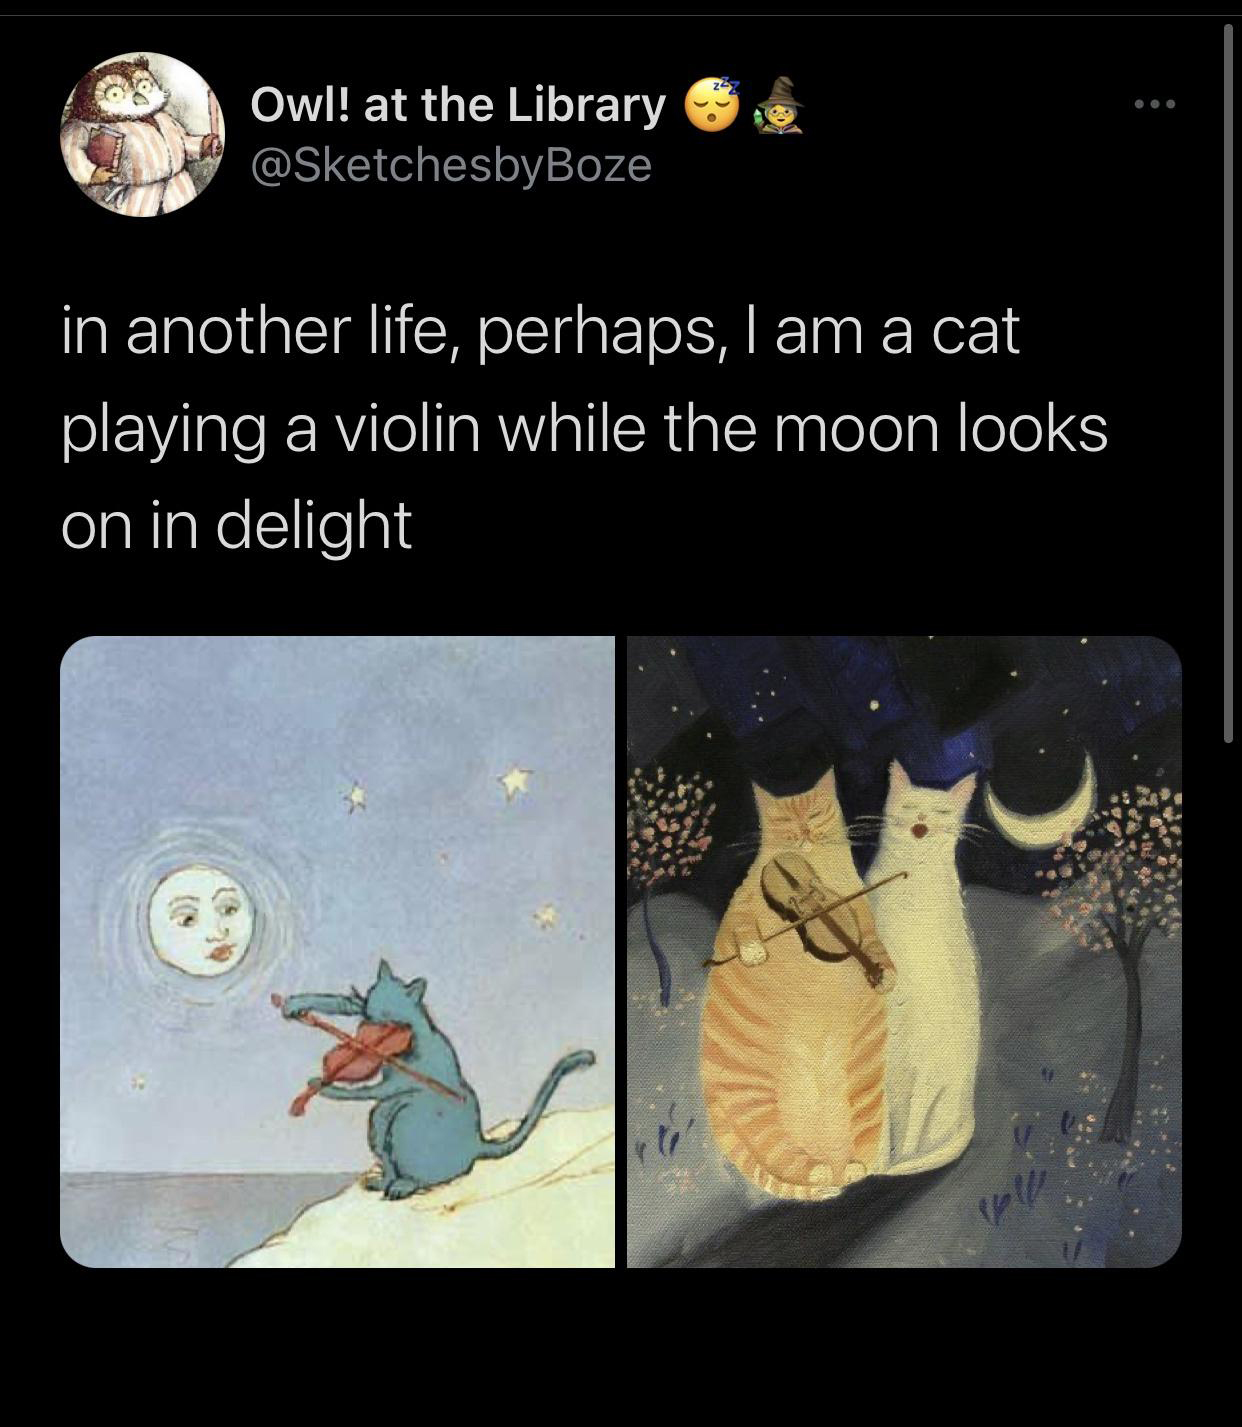 cat playing violin - Owl! at the Library in another life, perhaps, I am a cat playing a violin while the moon looks on in delight